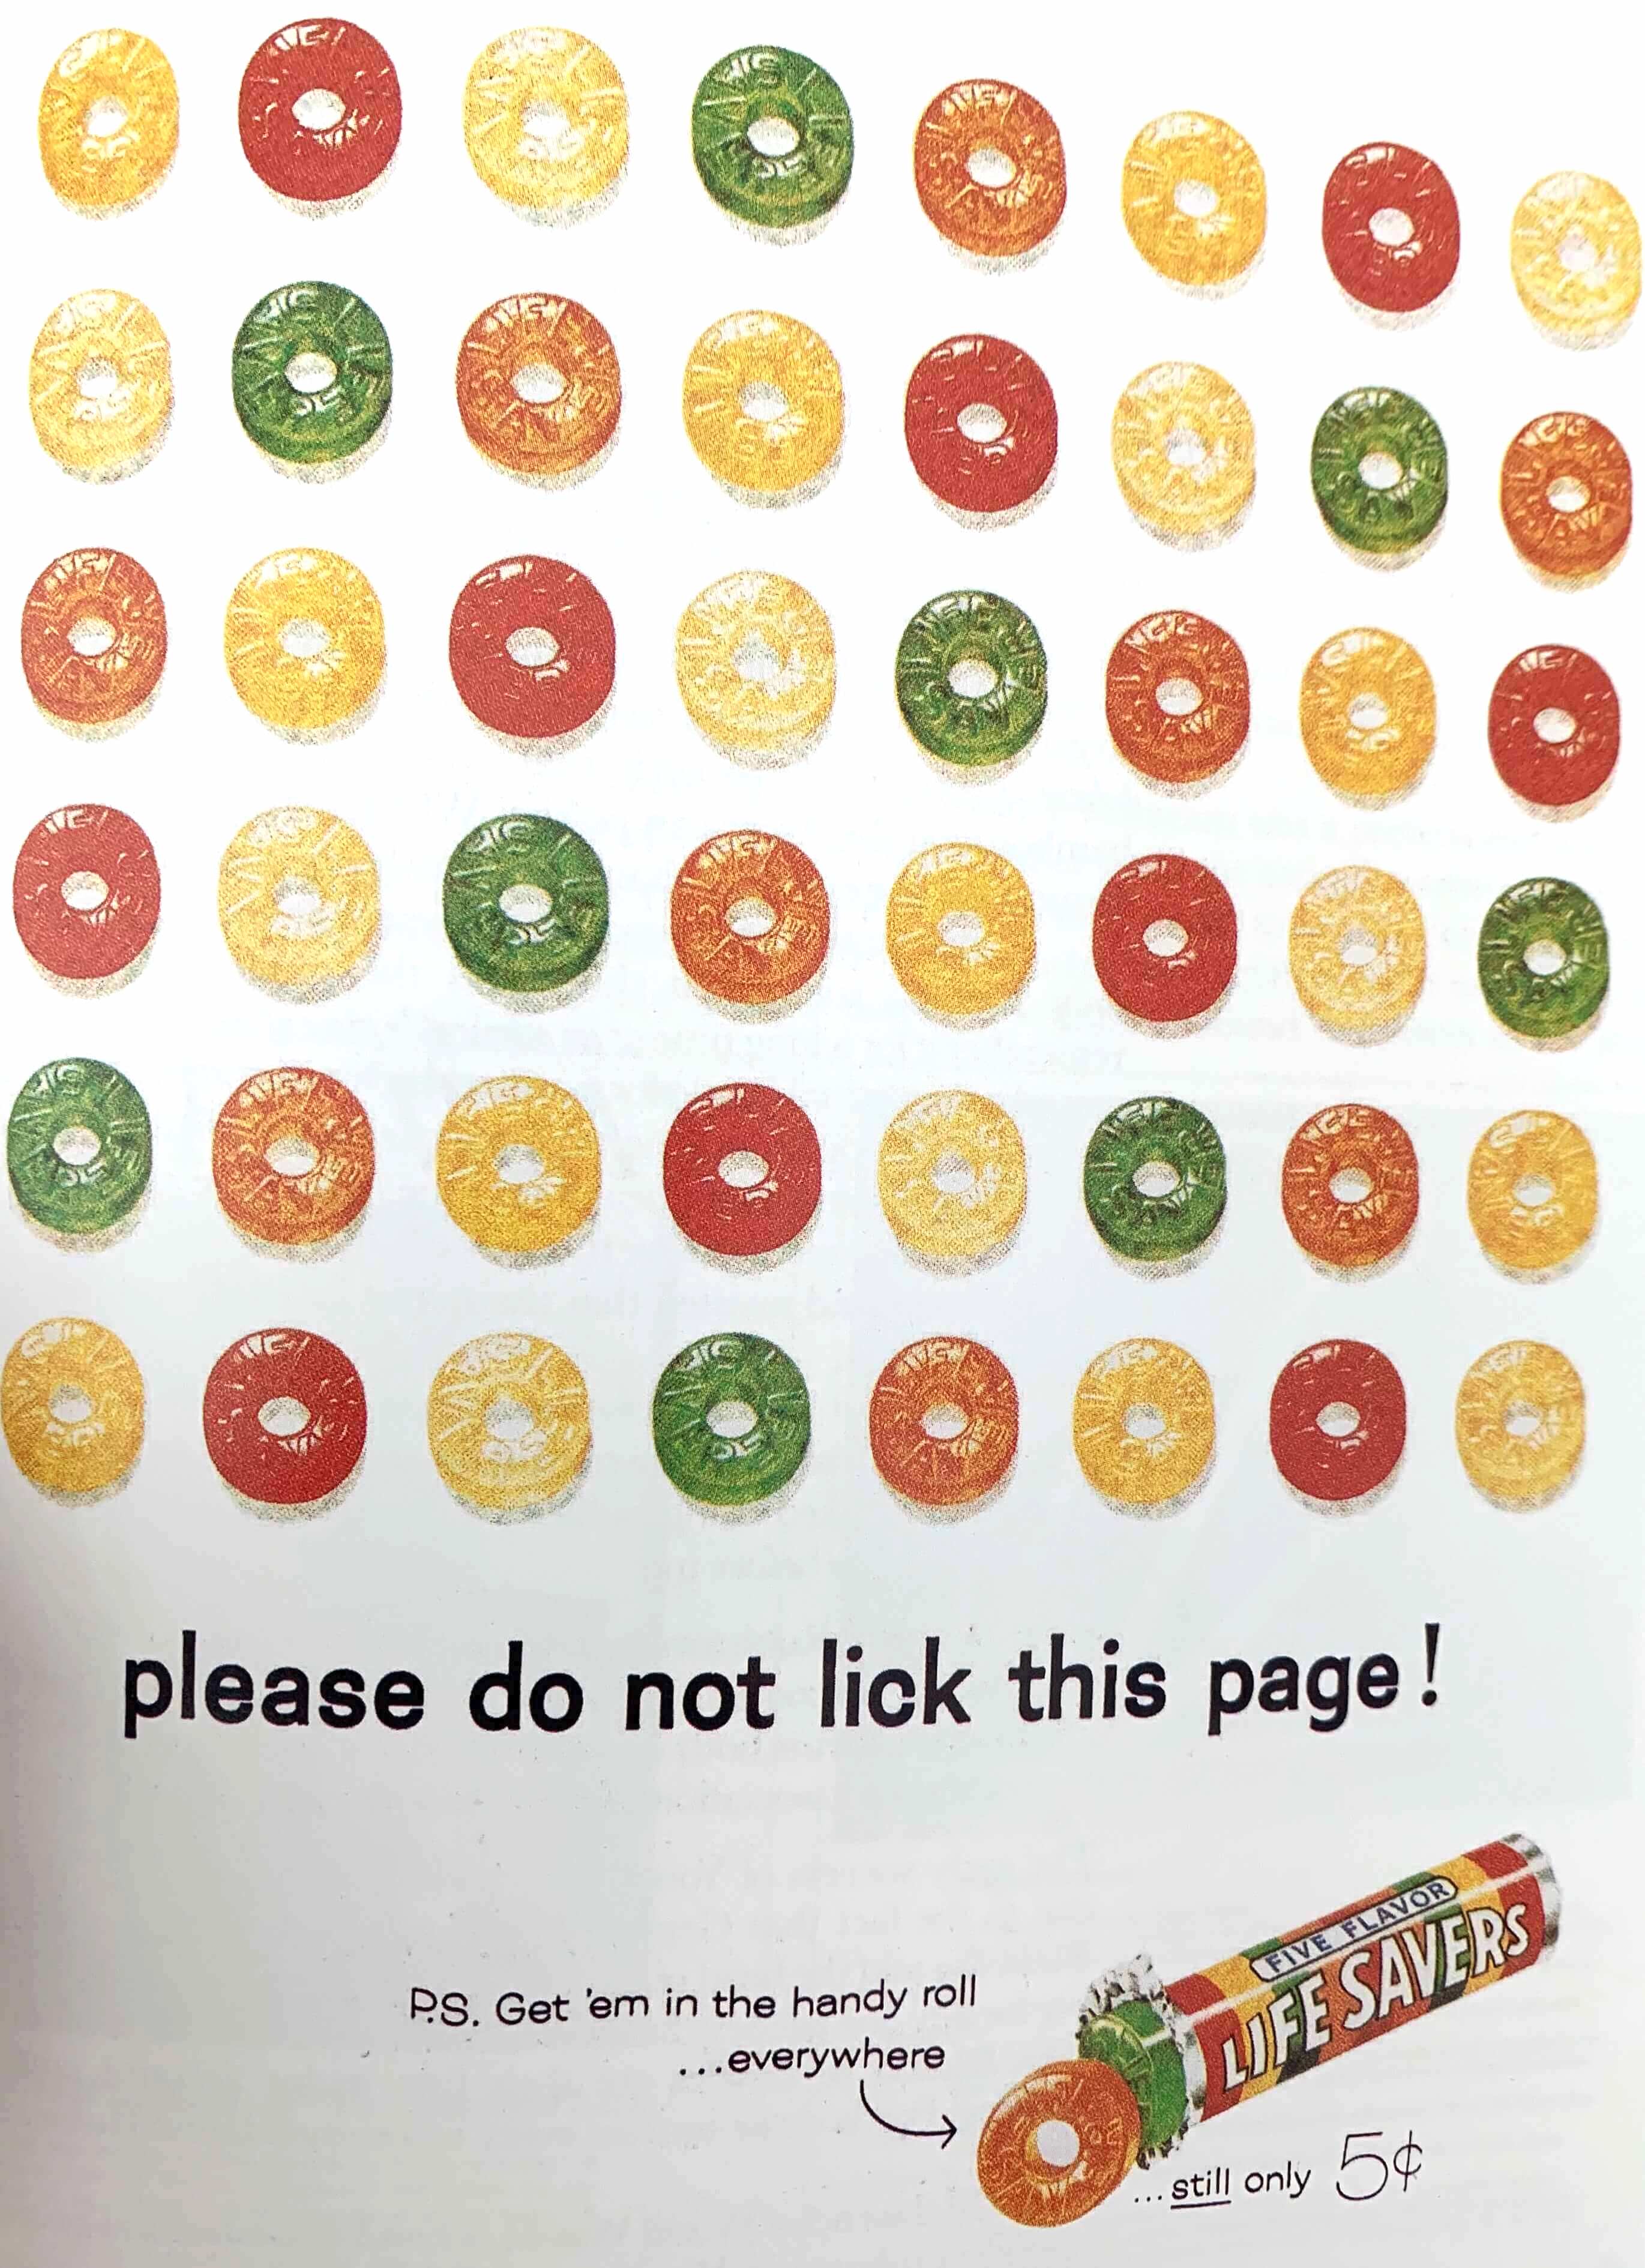 Life Safer's Do not Lick This Page Ad by Raymond Rubicam